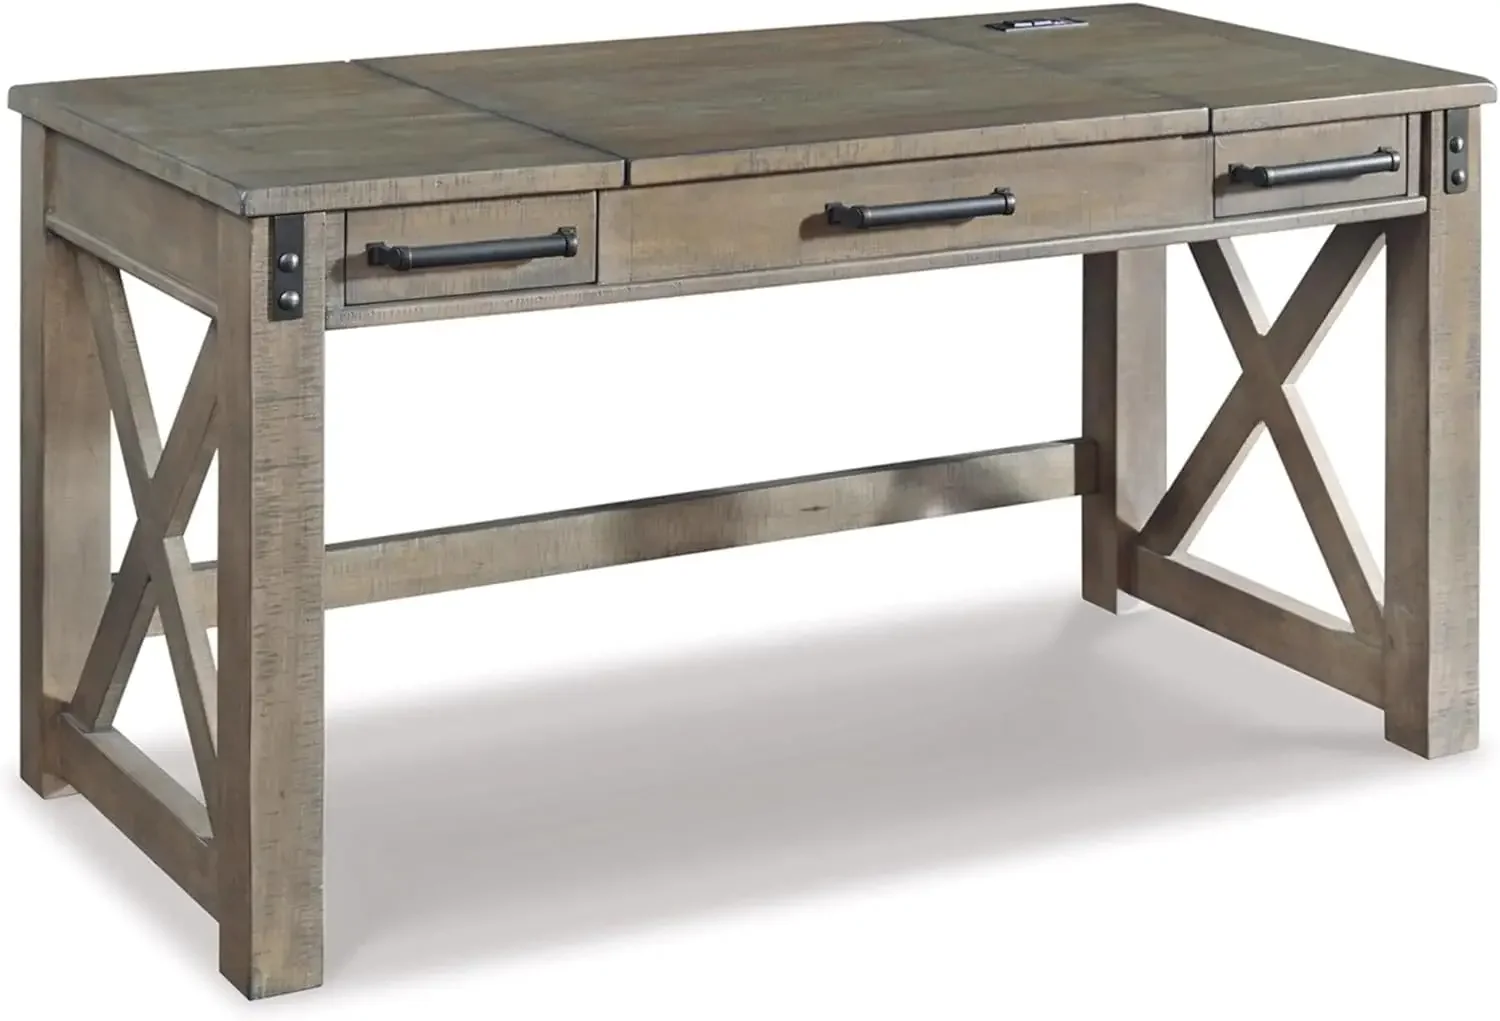 

Signature Design by Ashley Aldwin Rustic Farmhouse 60" Home Office Lift Top Desk with Charging Ports, Distressed Gray